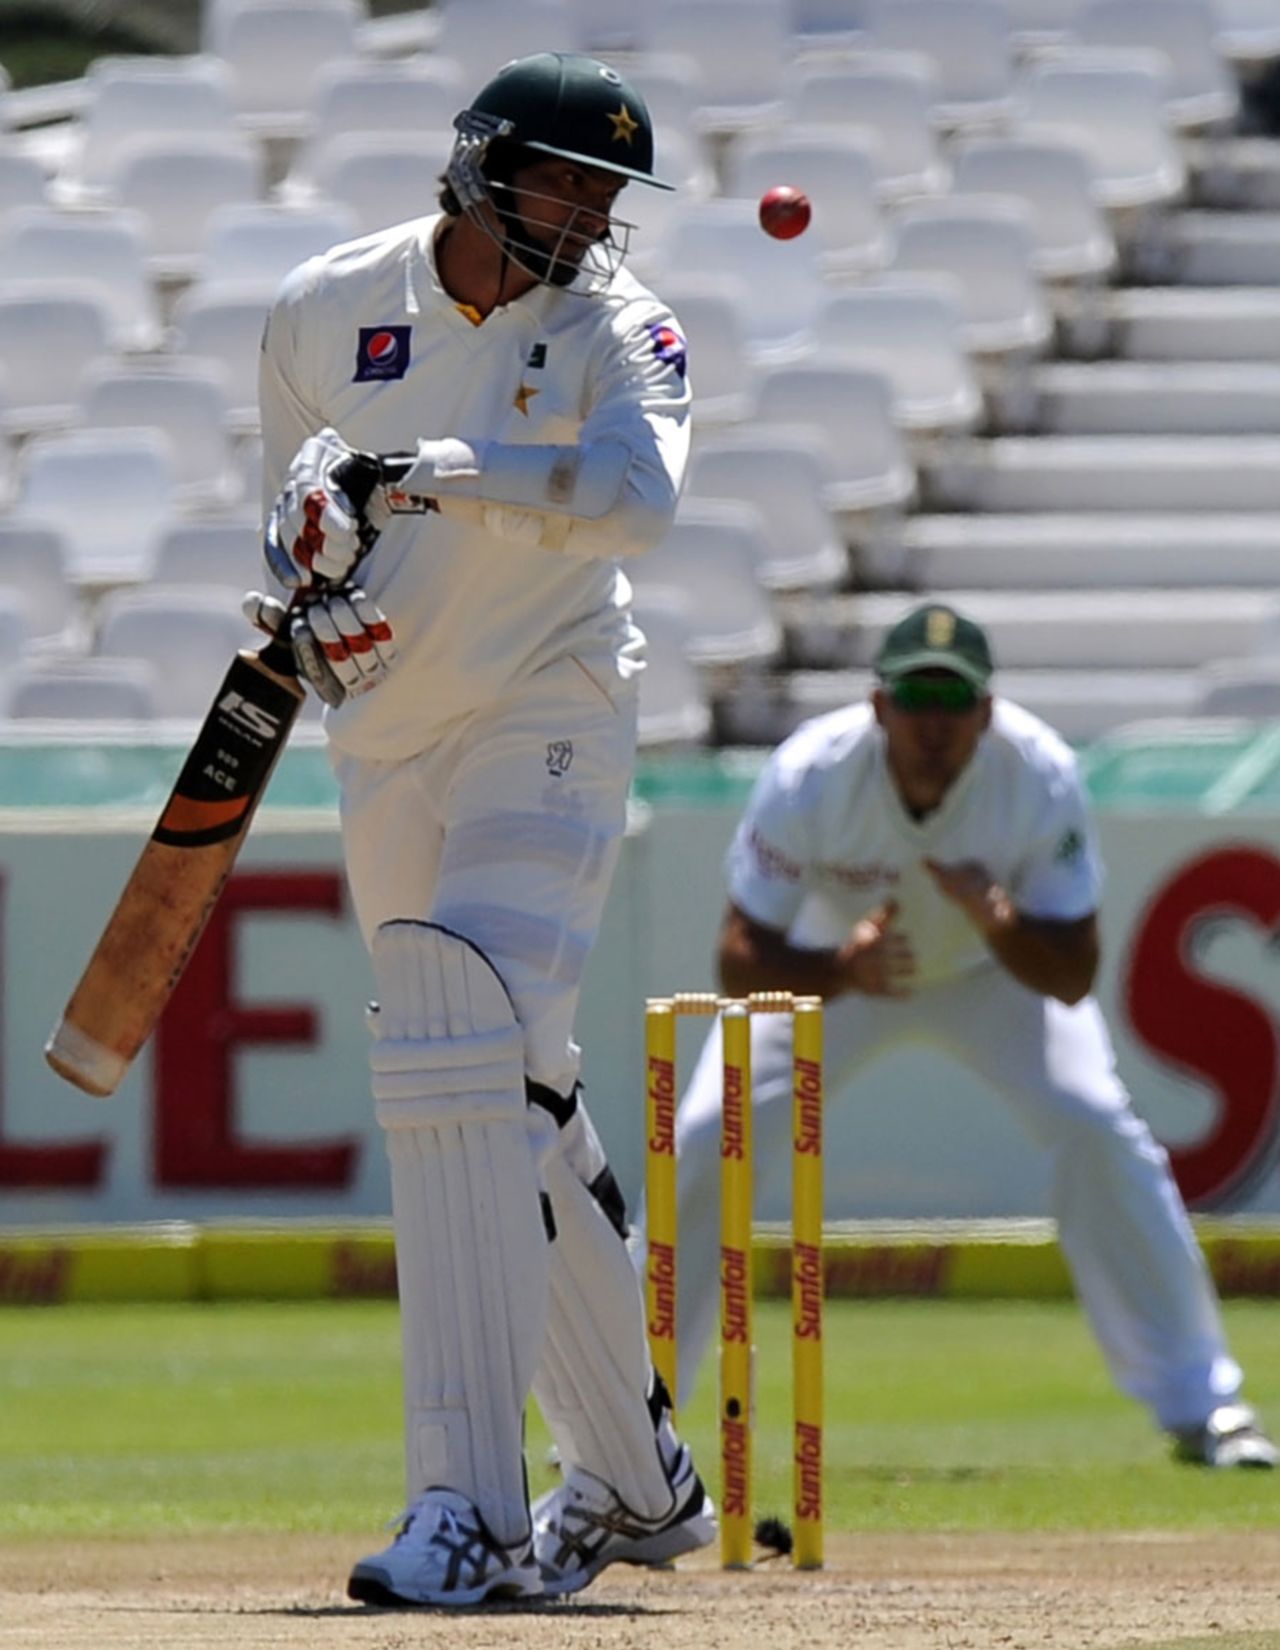 The seven-foot Mohammad Irfan evades a bouncer, South Africa v Pakistan, 2nd Test, Cape Town, 2nd day, February 15, 2013